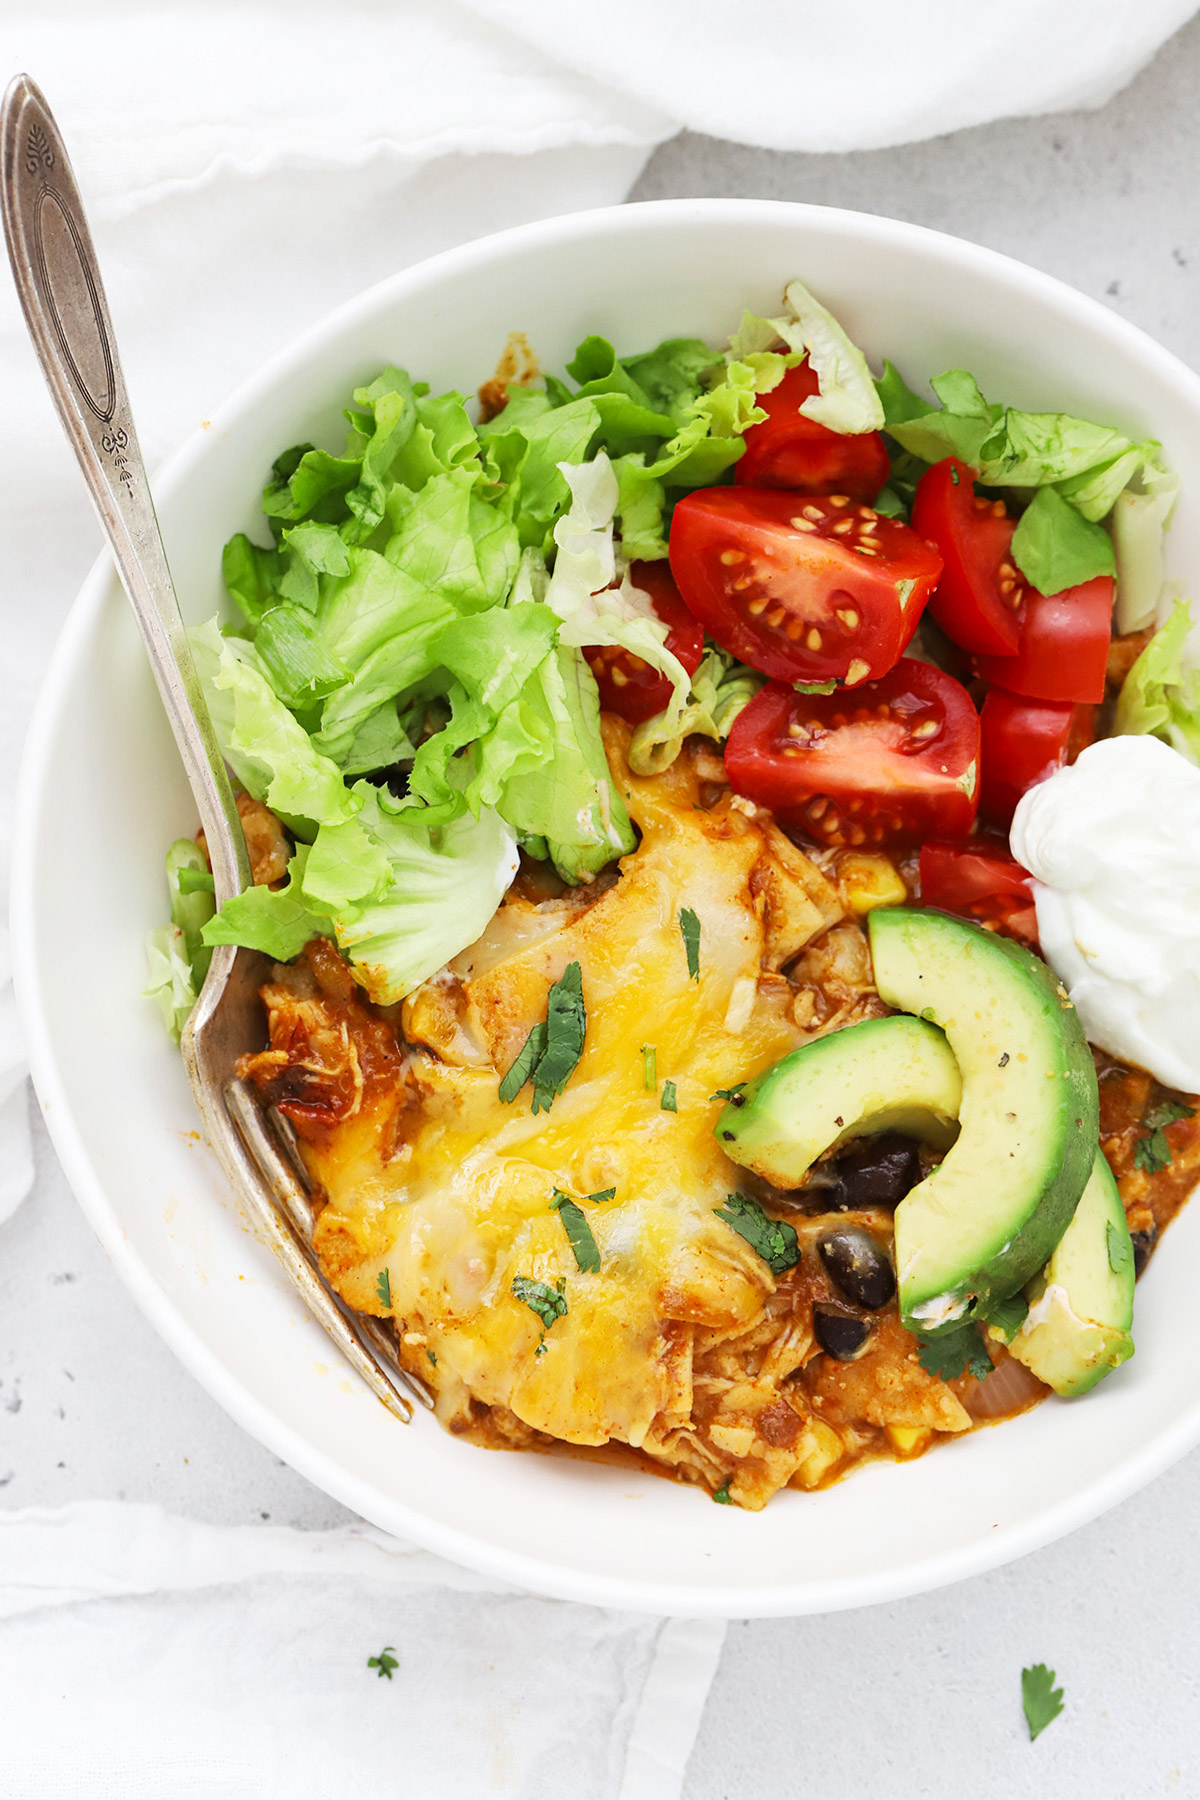 A bowl with a serving of chicken enchilada skillet, served with toppings like avocado, cilantro, lettuce, and tomato